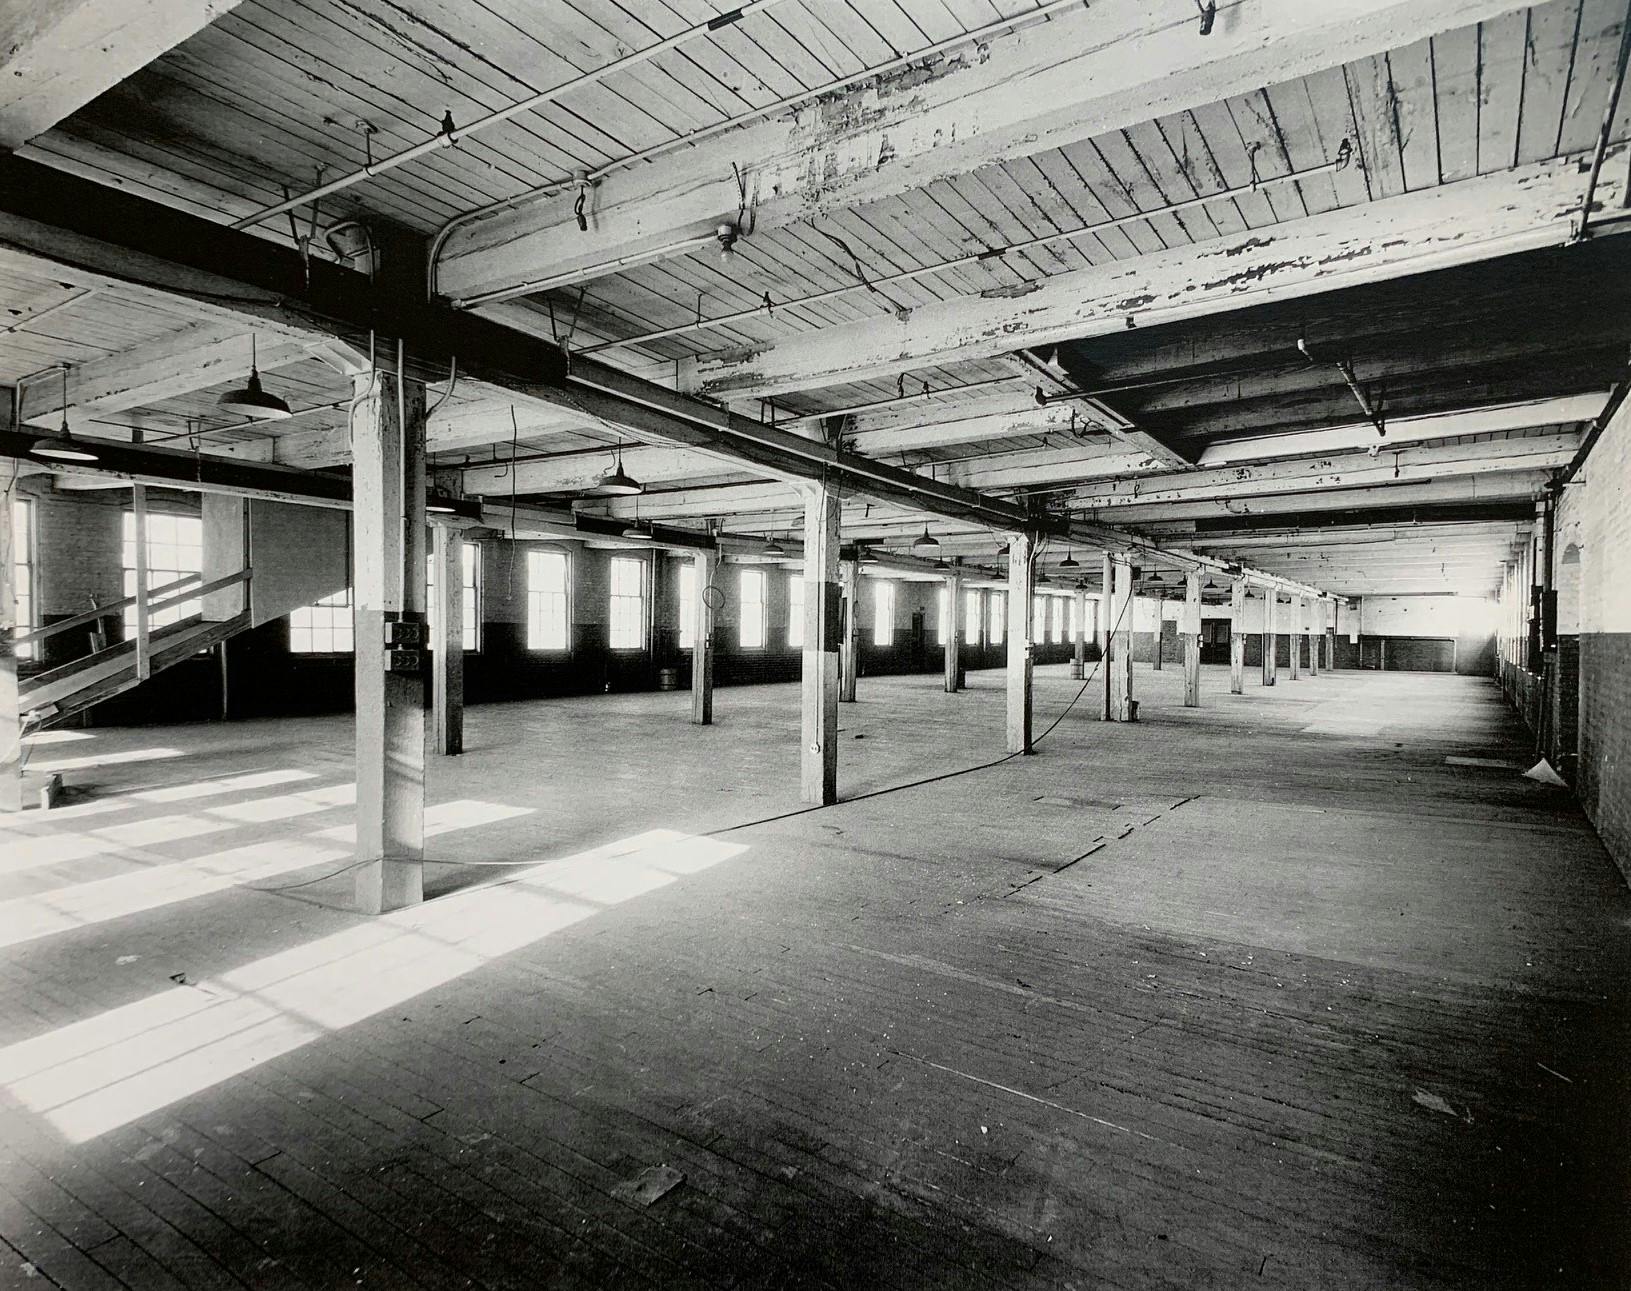 Jackson Auto factory in period - Second floor warehouse